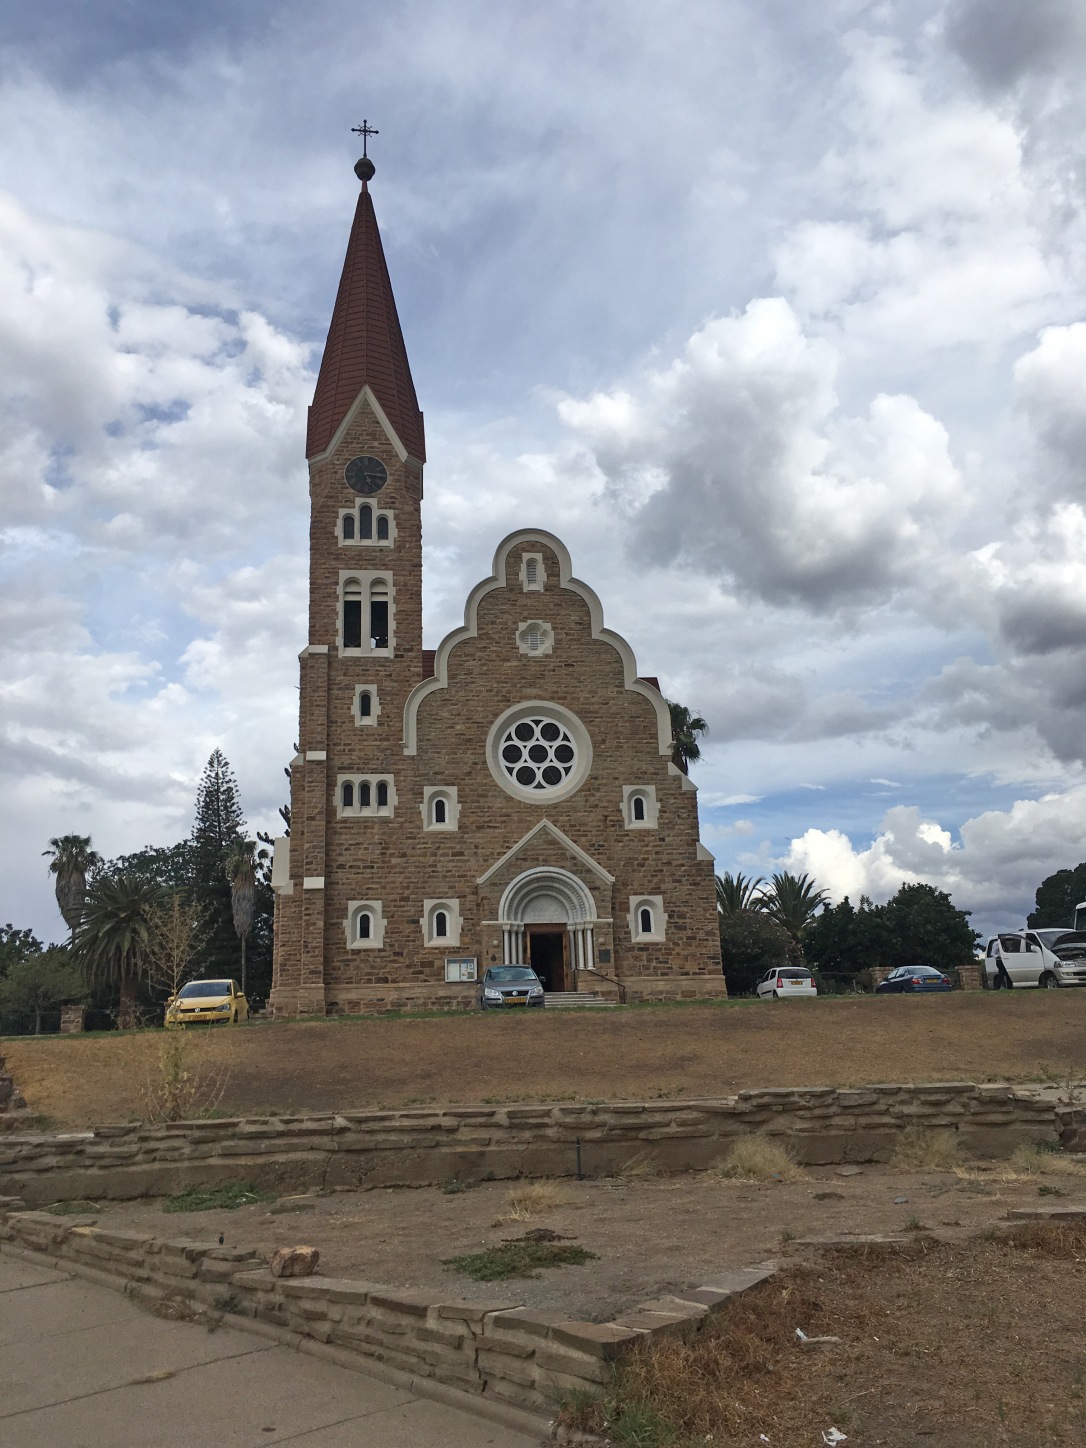 Lutheran Christuskirche (Christ Church) on a roundabout, Windhoek Namibia on family road trip.